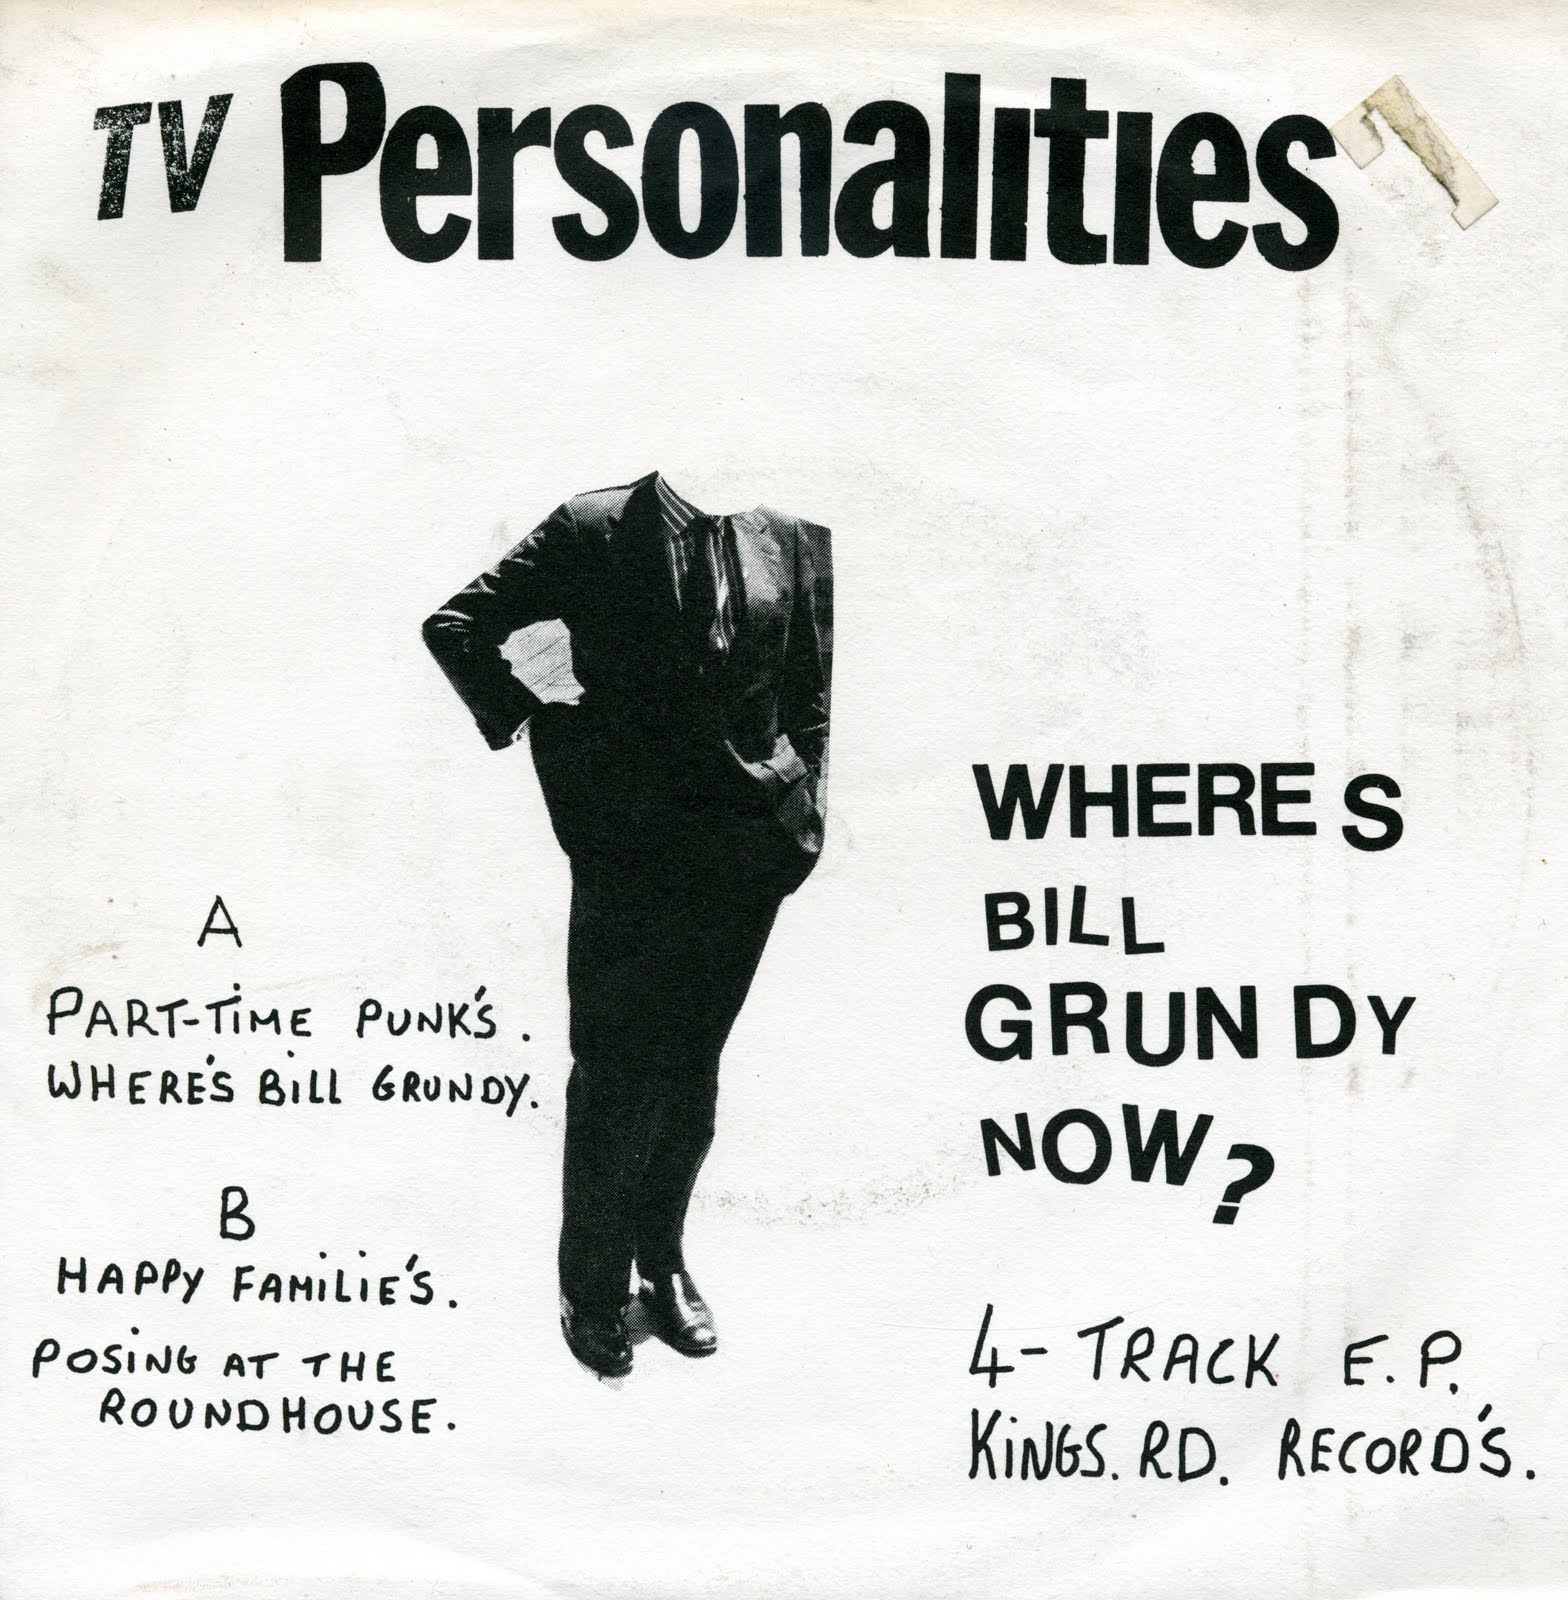 We coming home now. Television personalities. Дресс код New Wave Post Punk. Журнал the times панки. Siouxsie Bill Grundy.